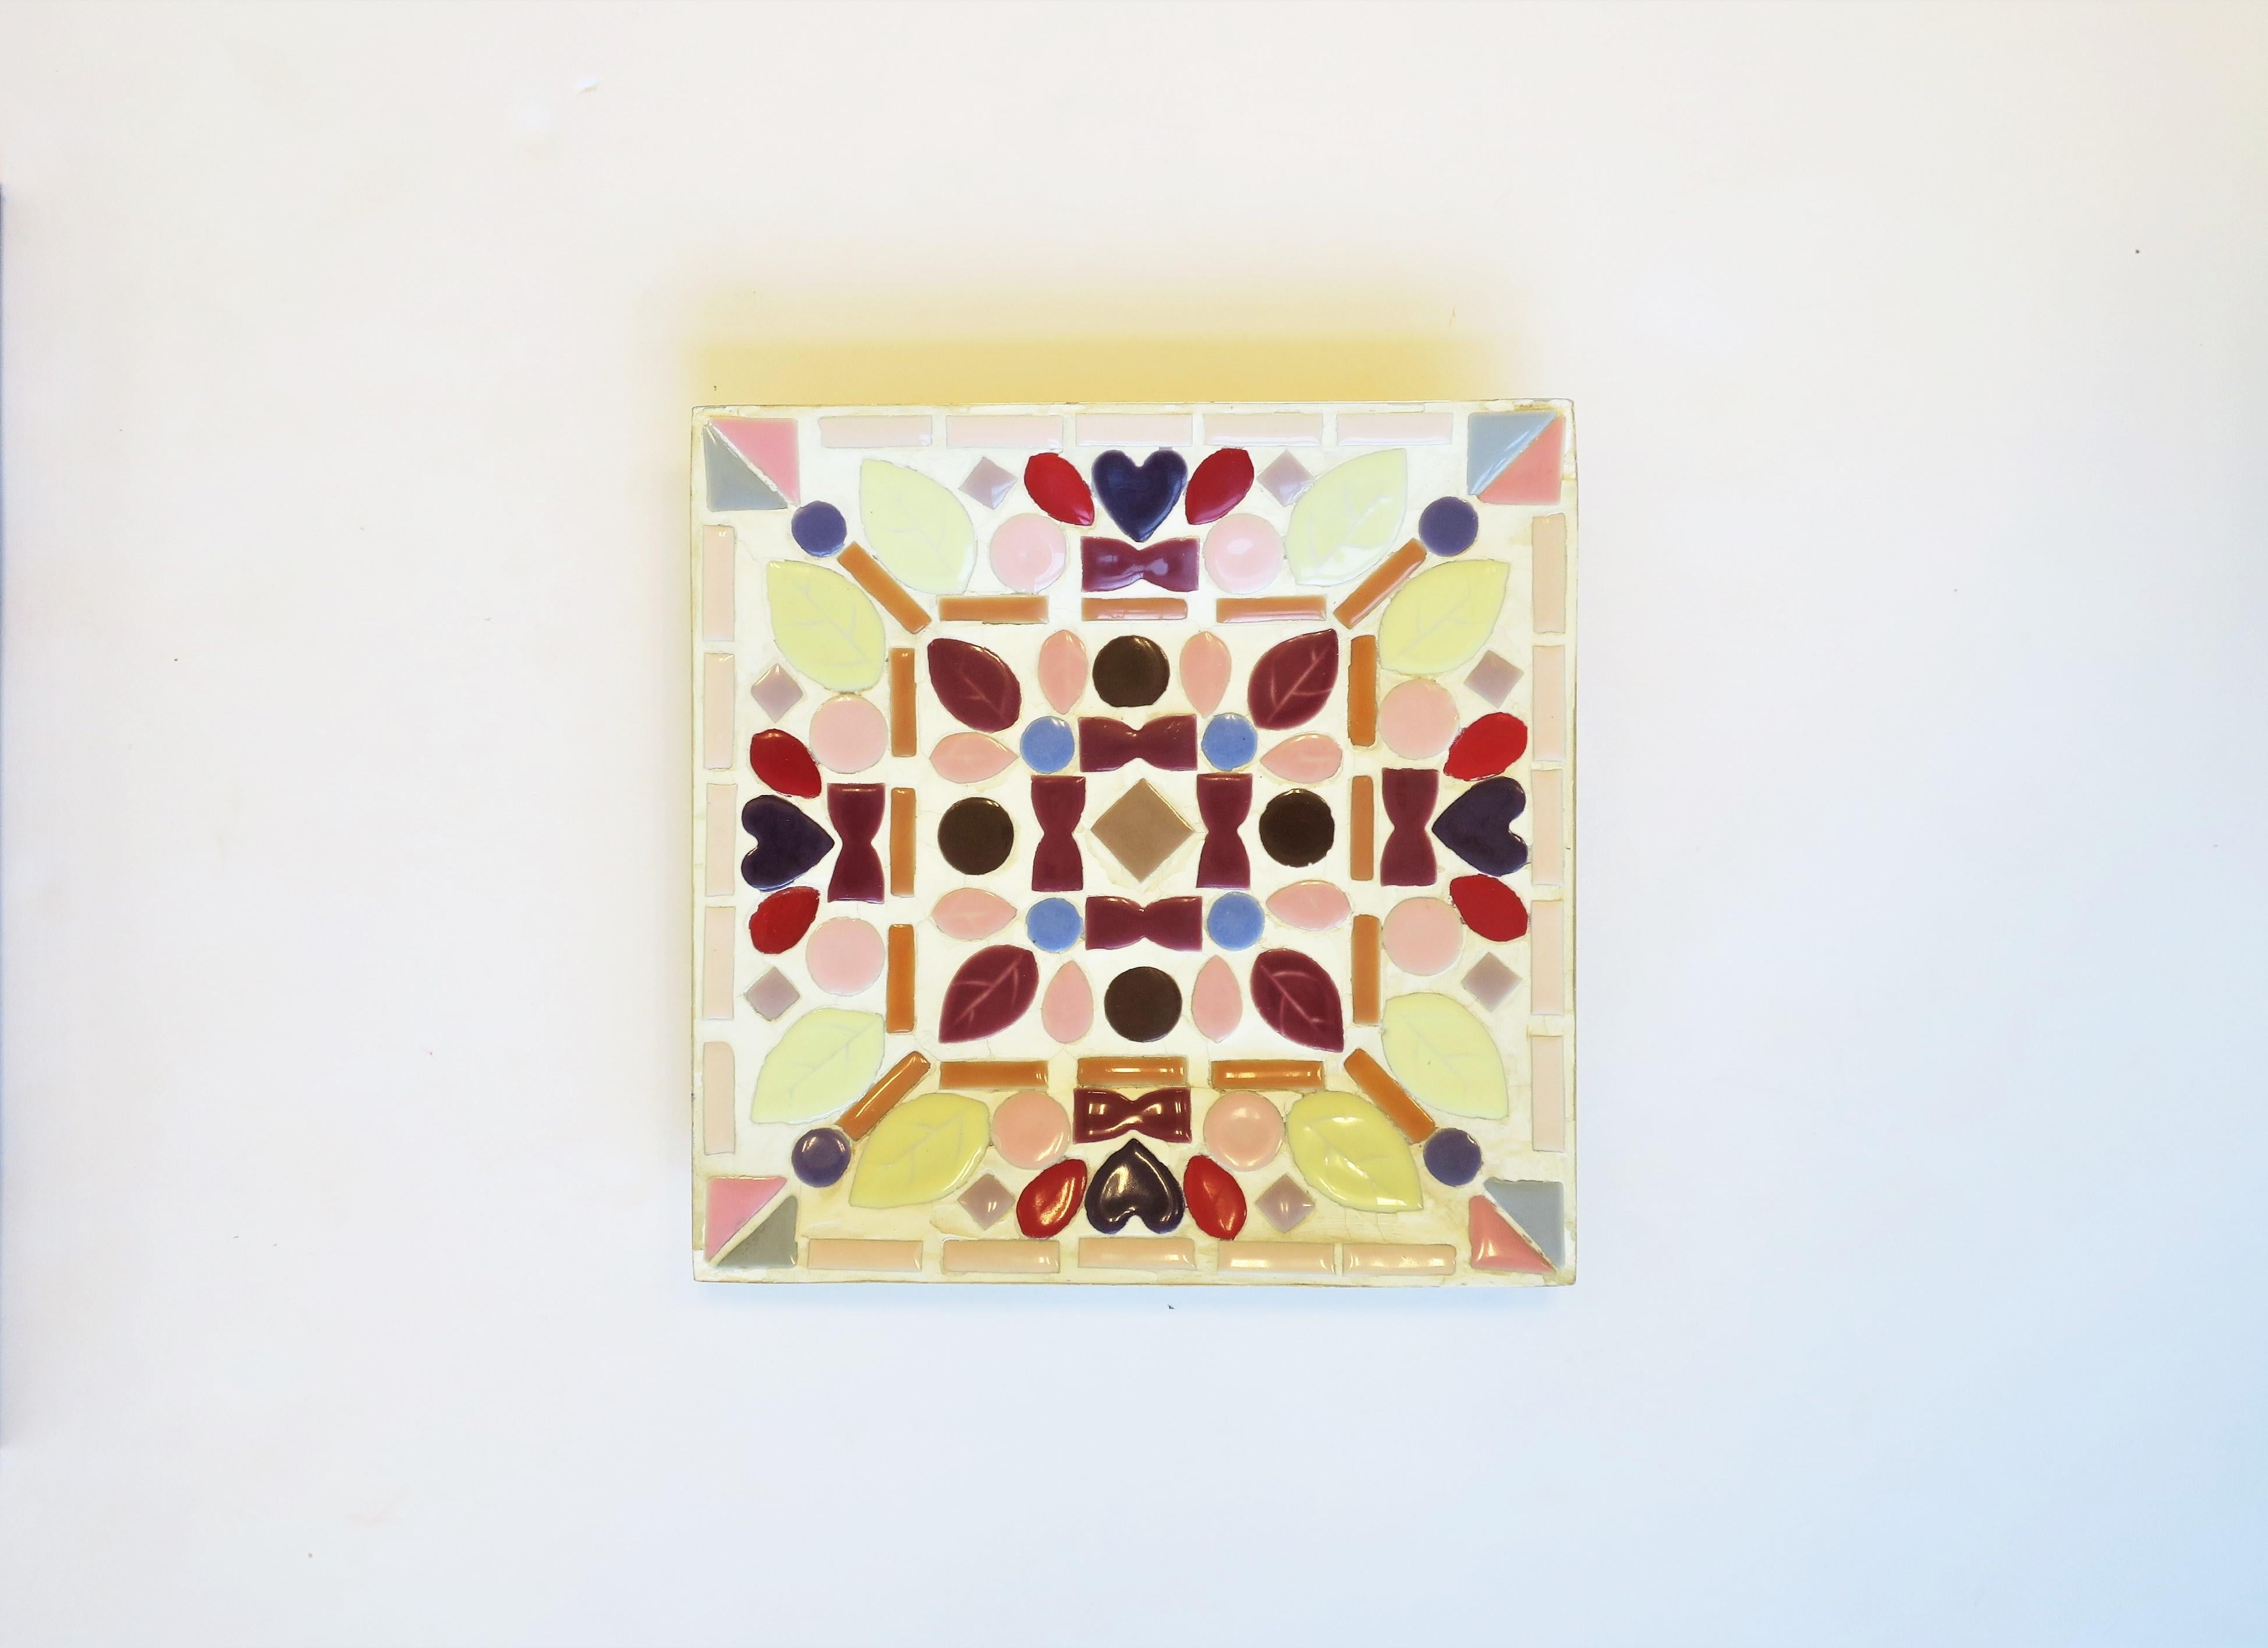 A very beautiful tile mosaic dish bowl vide-poche, circa 1960s-1970s, USA. Dish is square; designed with geometric tiles along with tiles in heart, leaf and teardrop shapes. Tile colors include pastel yellow, pinks, and purples, together with rich